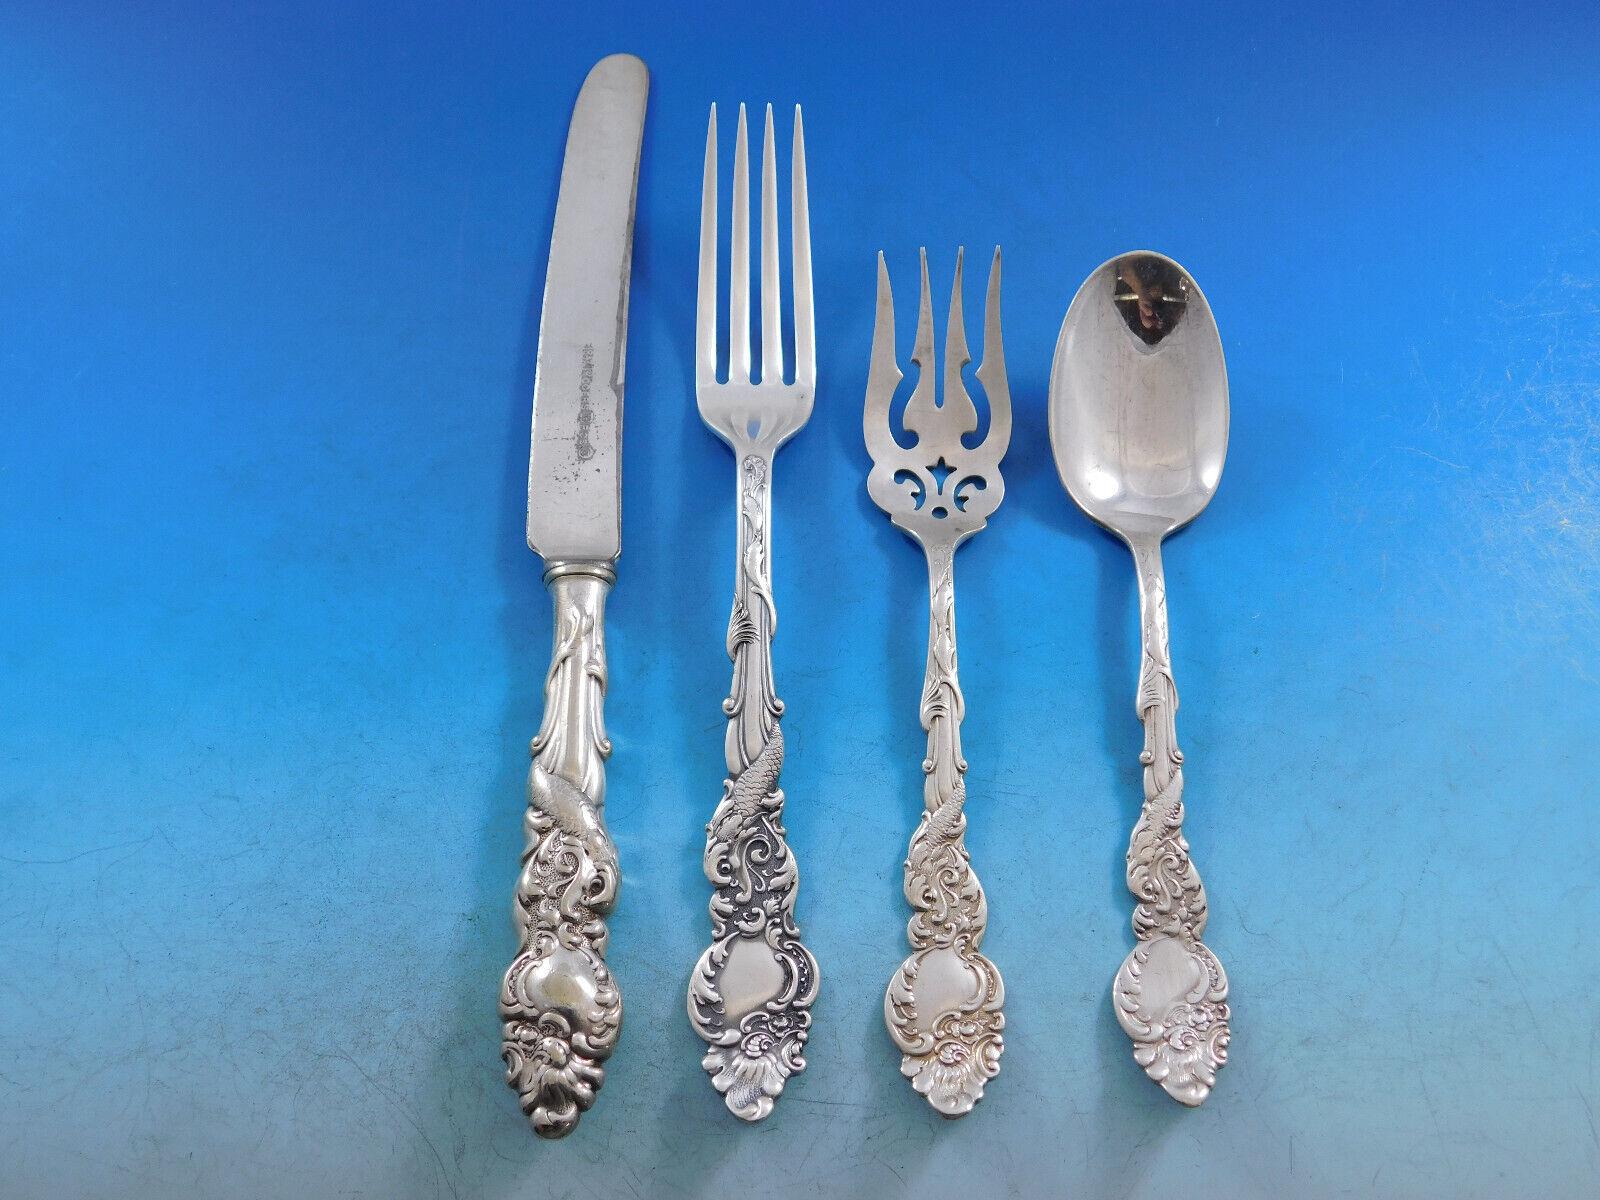 1847 rogers brothers silverware